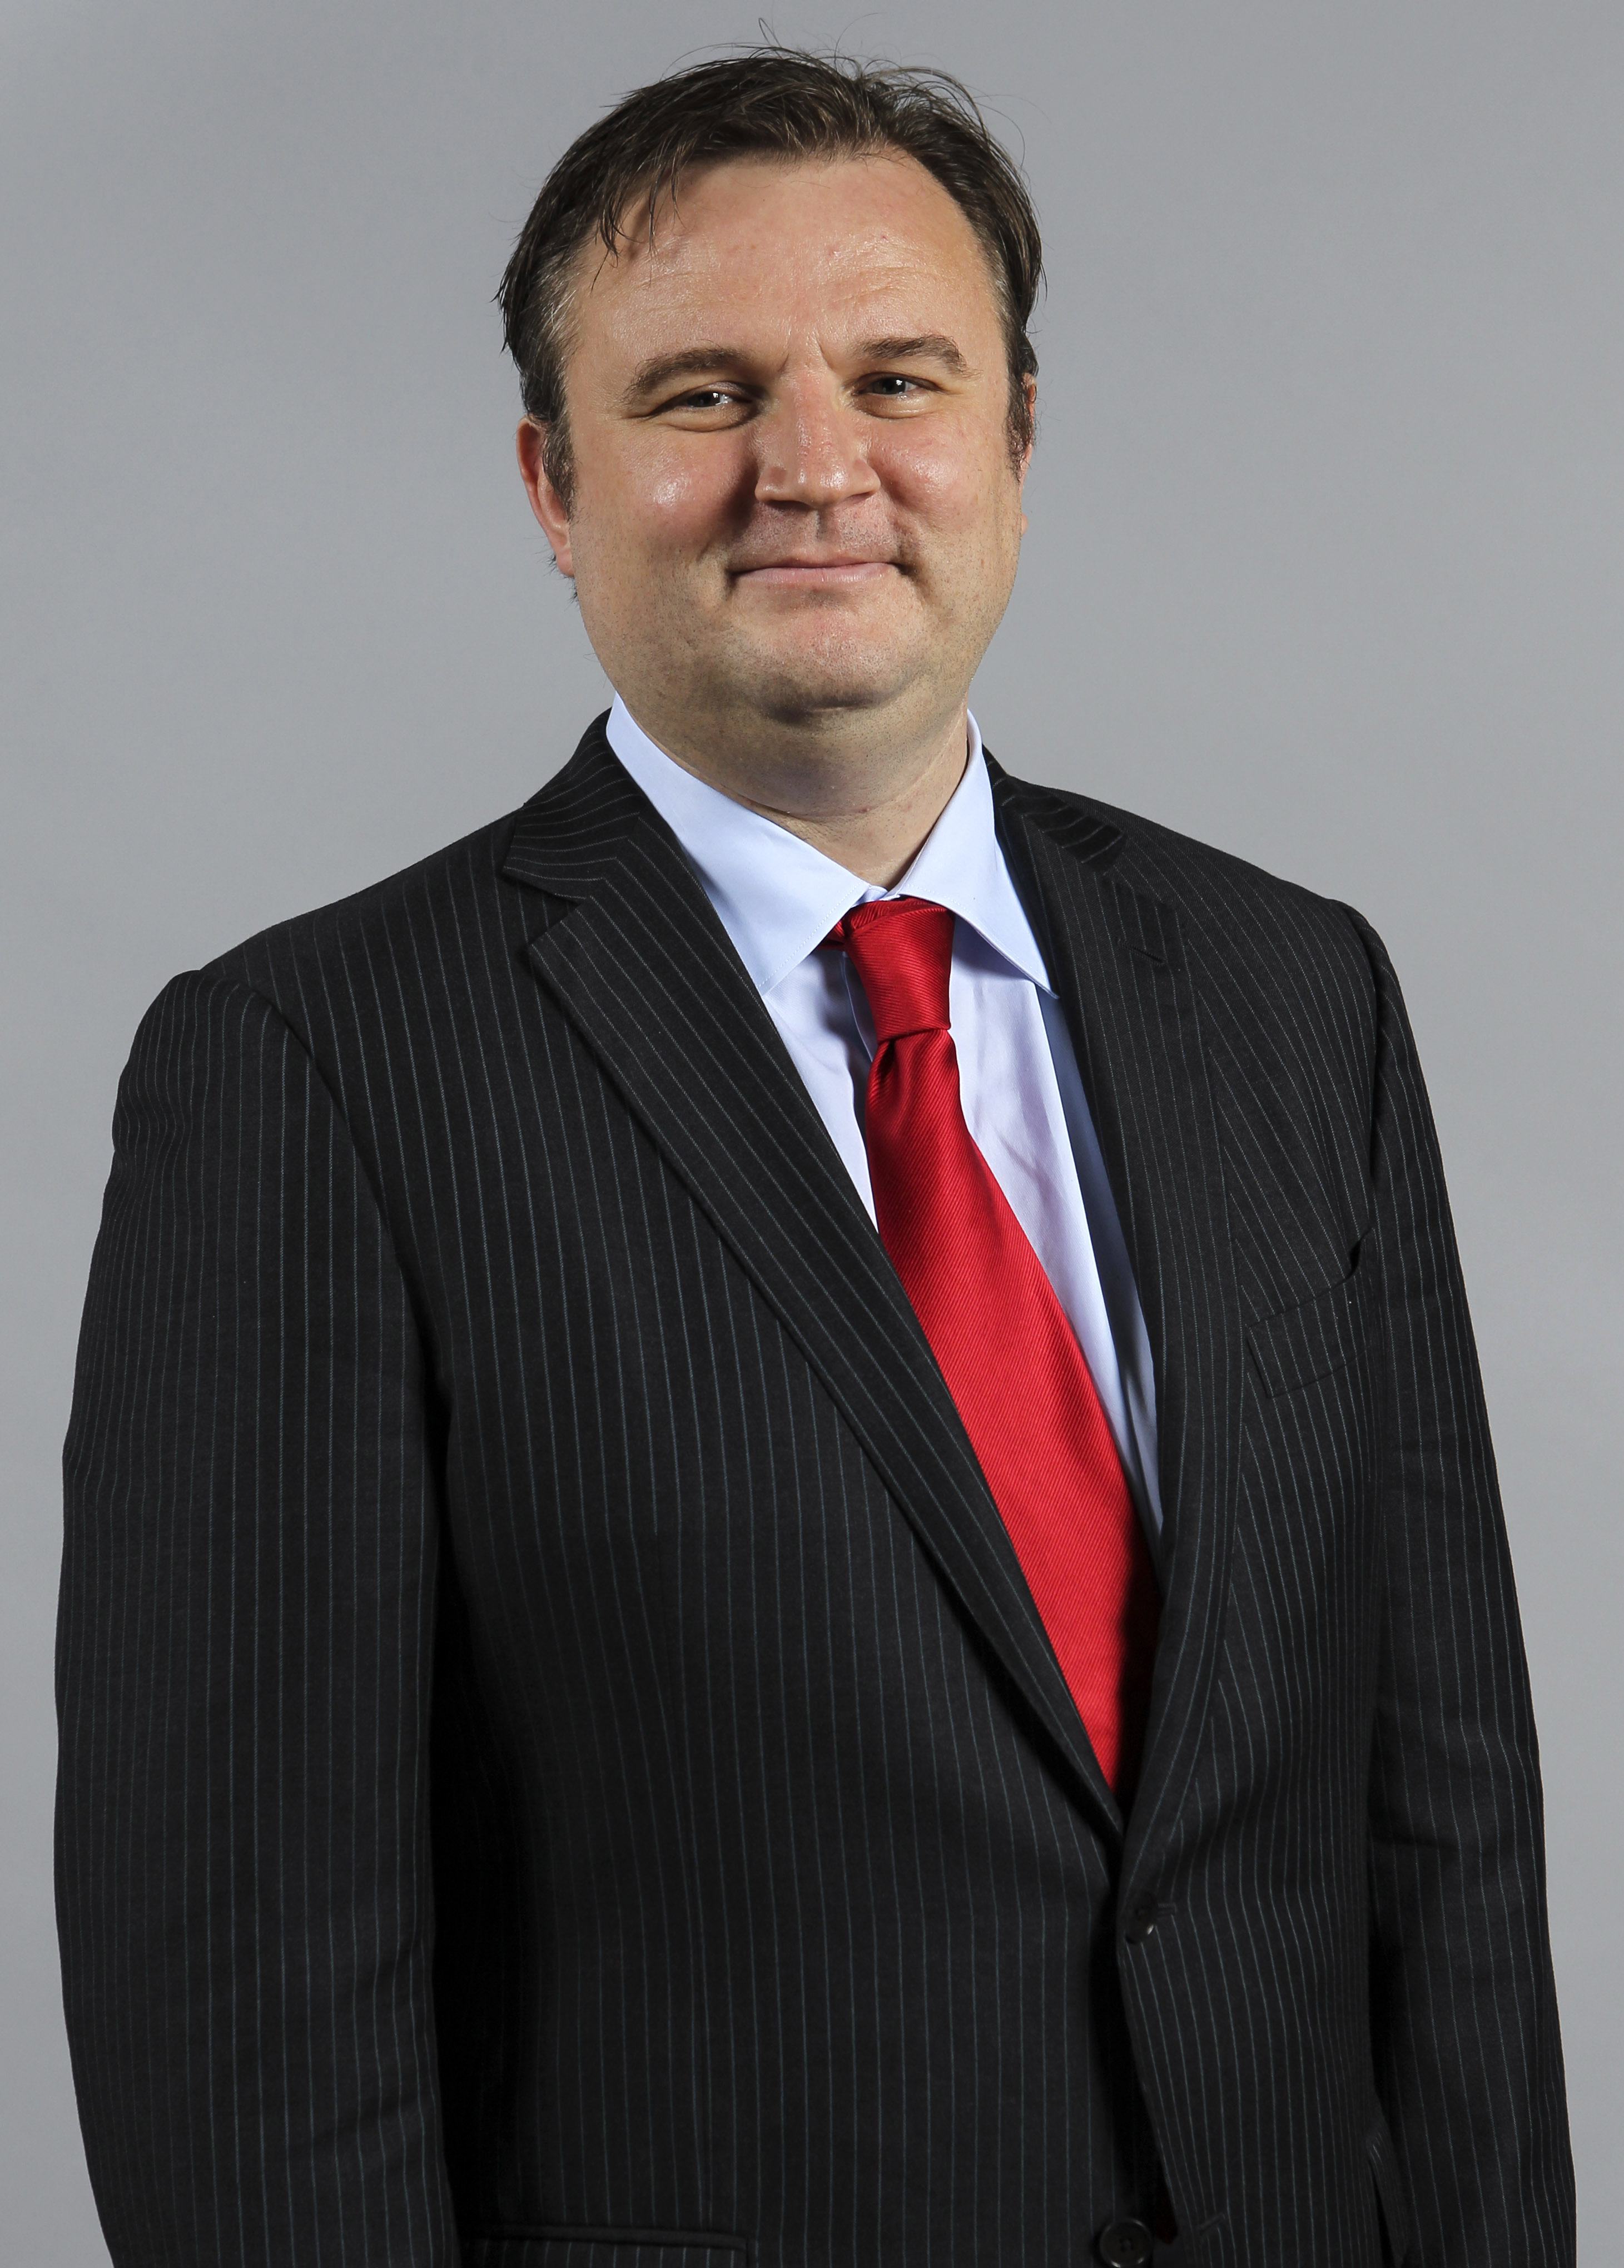 Report: Sixers Wanted Daryl Morey to Replace Bryan Colangelo